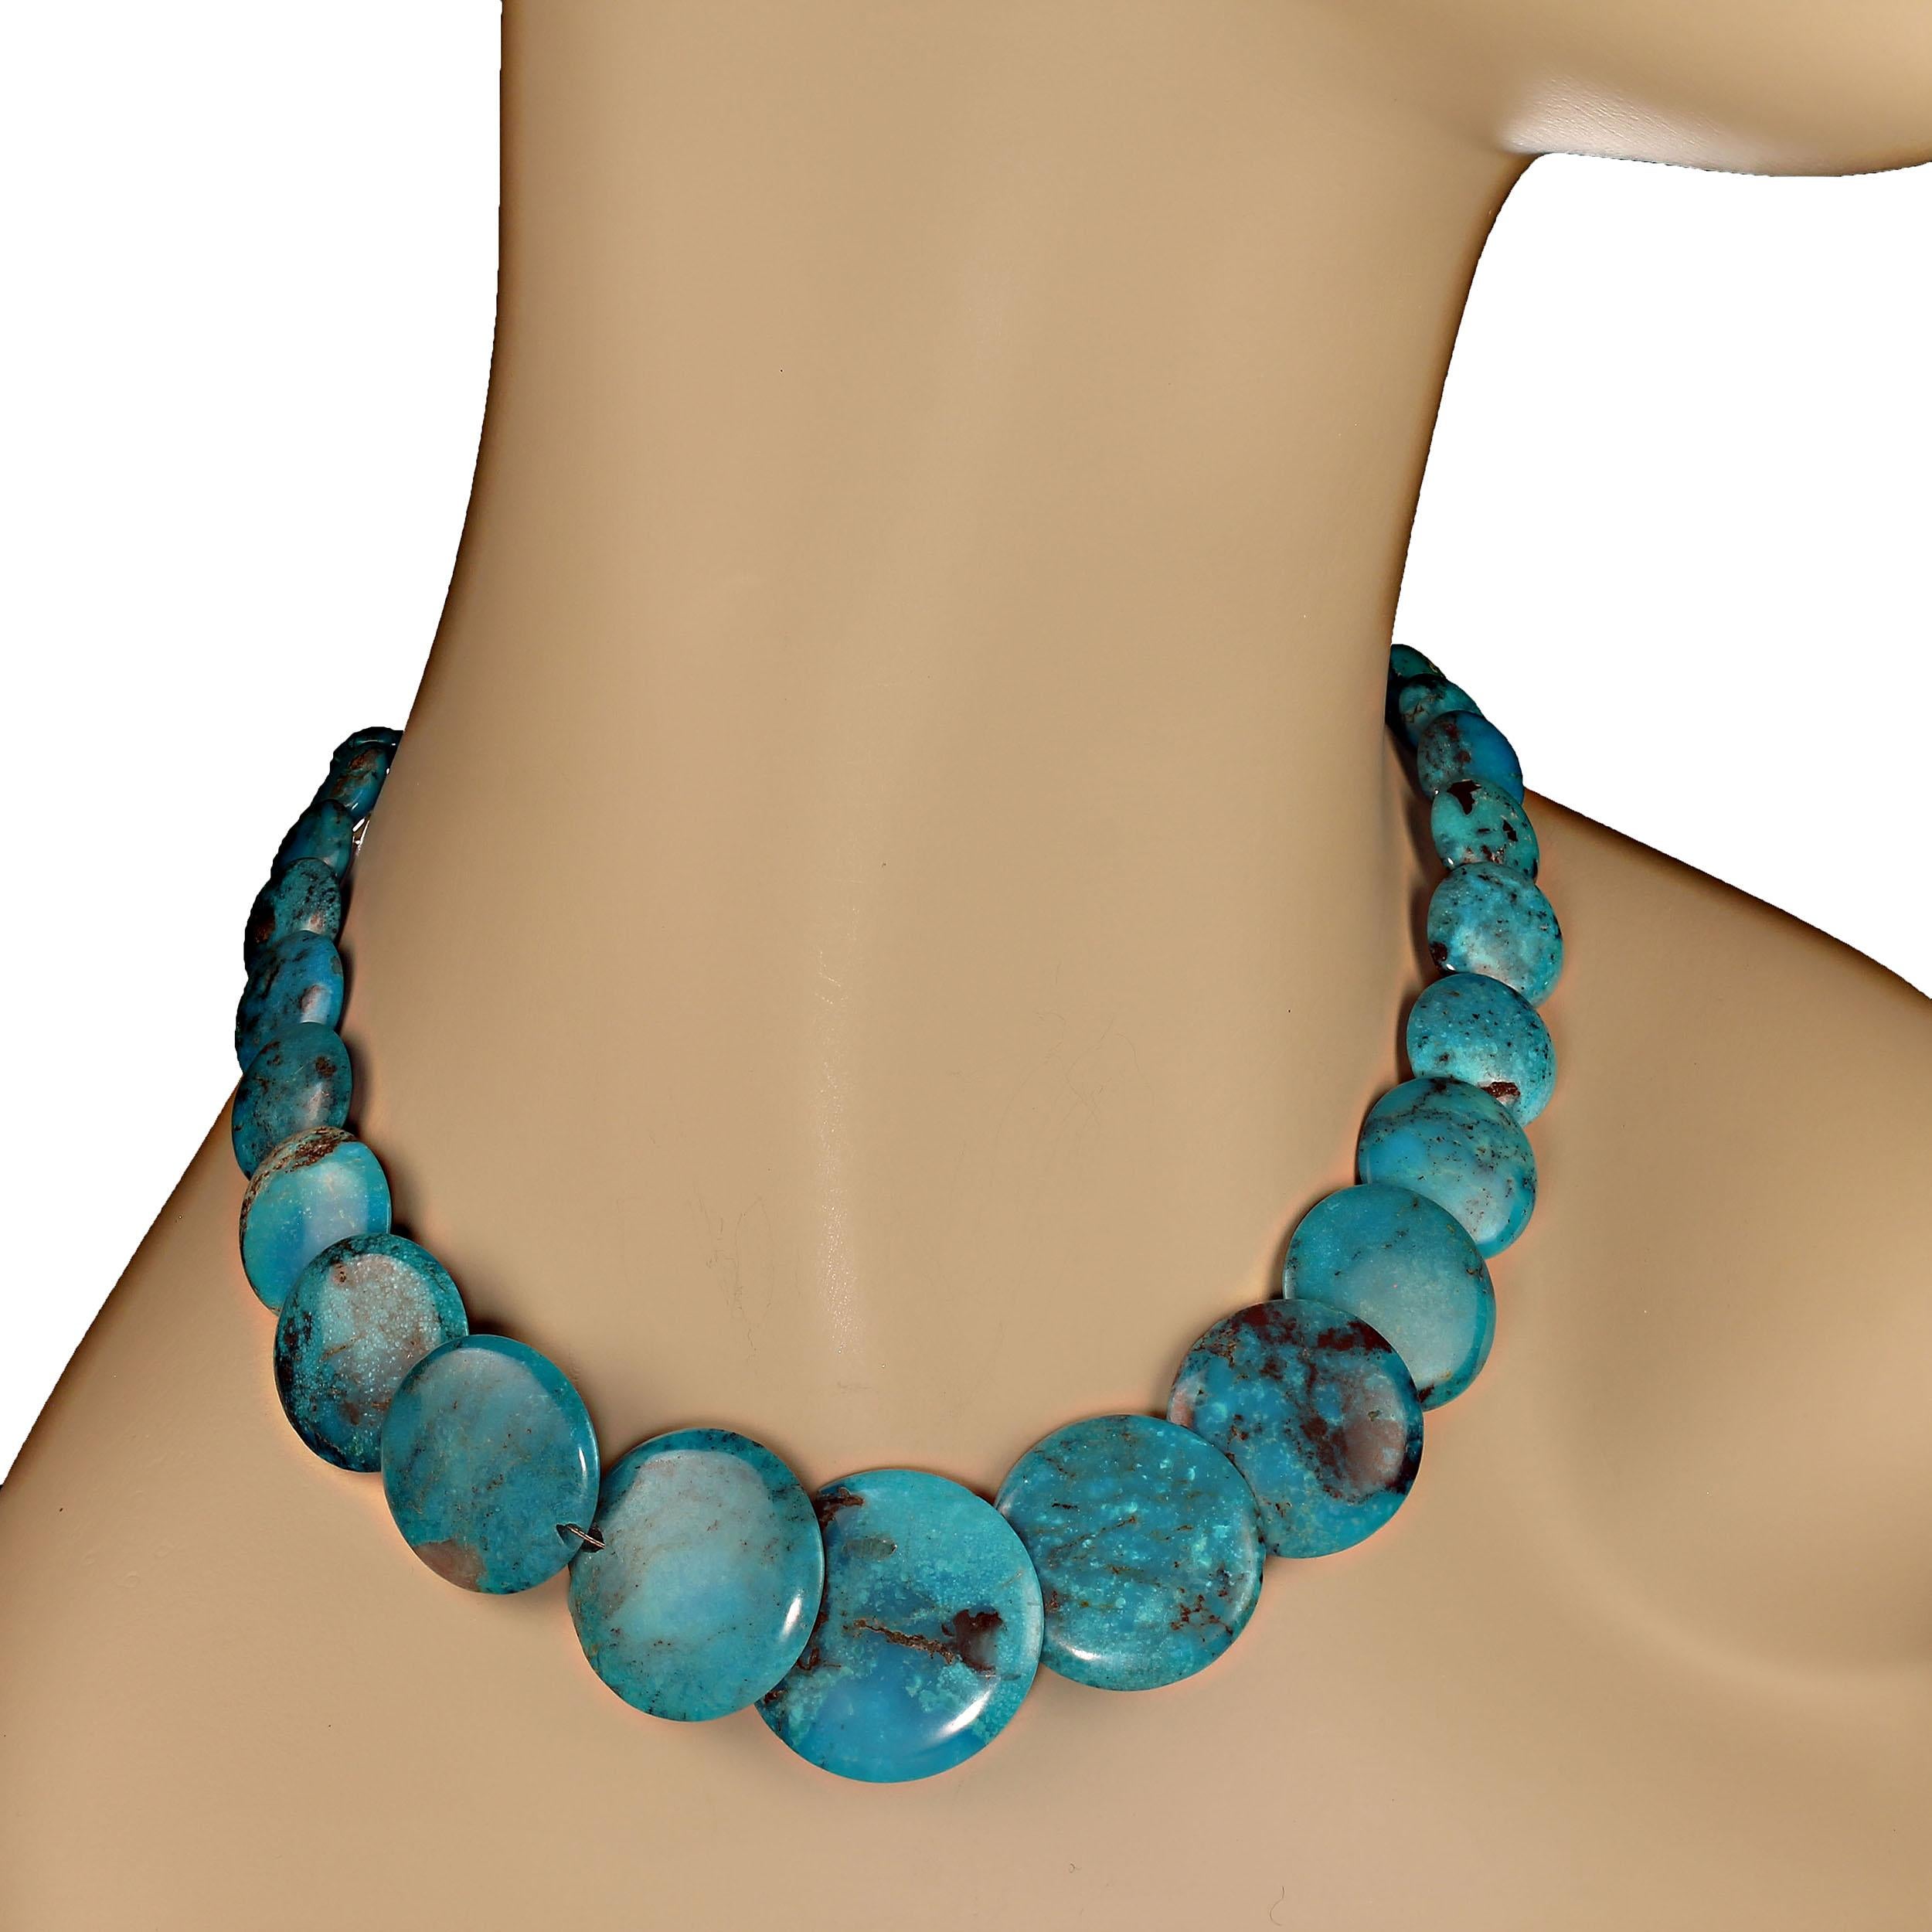 20 Inch graduated Nacozari turquoise necklace with sterling silver hook and eye clasp.  This necklace is graduated smooth round tablets ranging in size from 7 to 29mm. Nacozari turquoise comes from a copper mine in Sonora, Mexico which is now